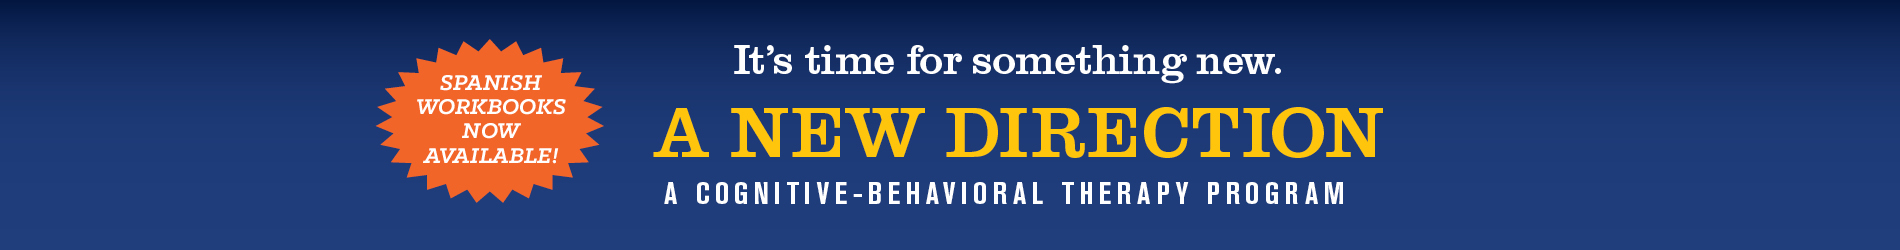 It's time for something new. A new direction. A cognitive-behavioral therapy program. Spanish workbooks now available!